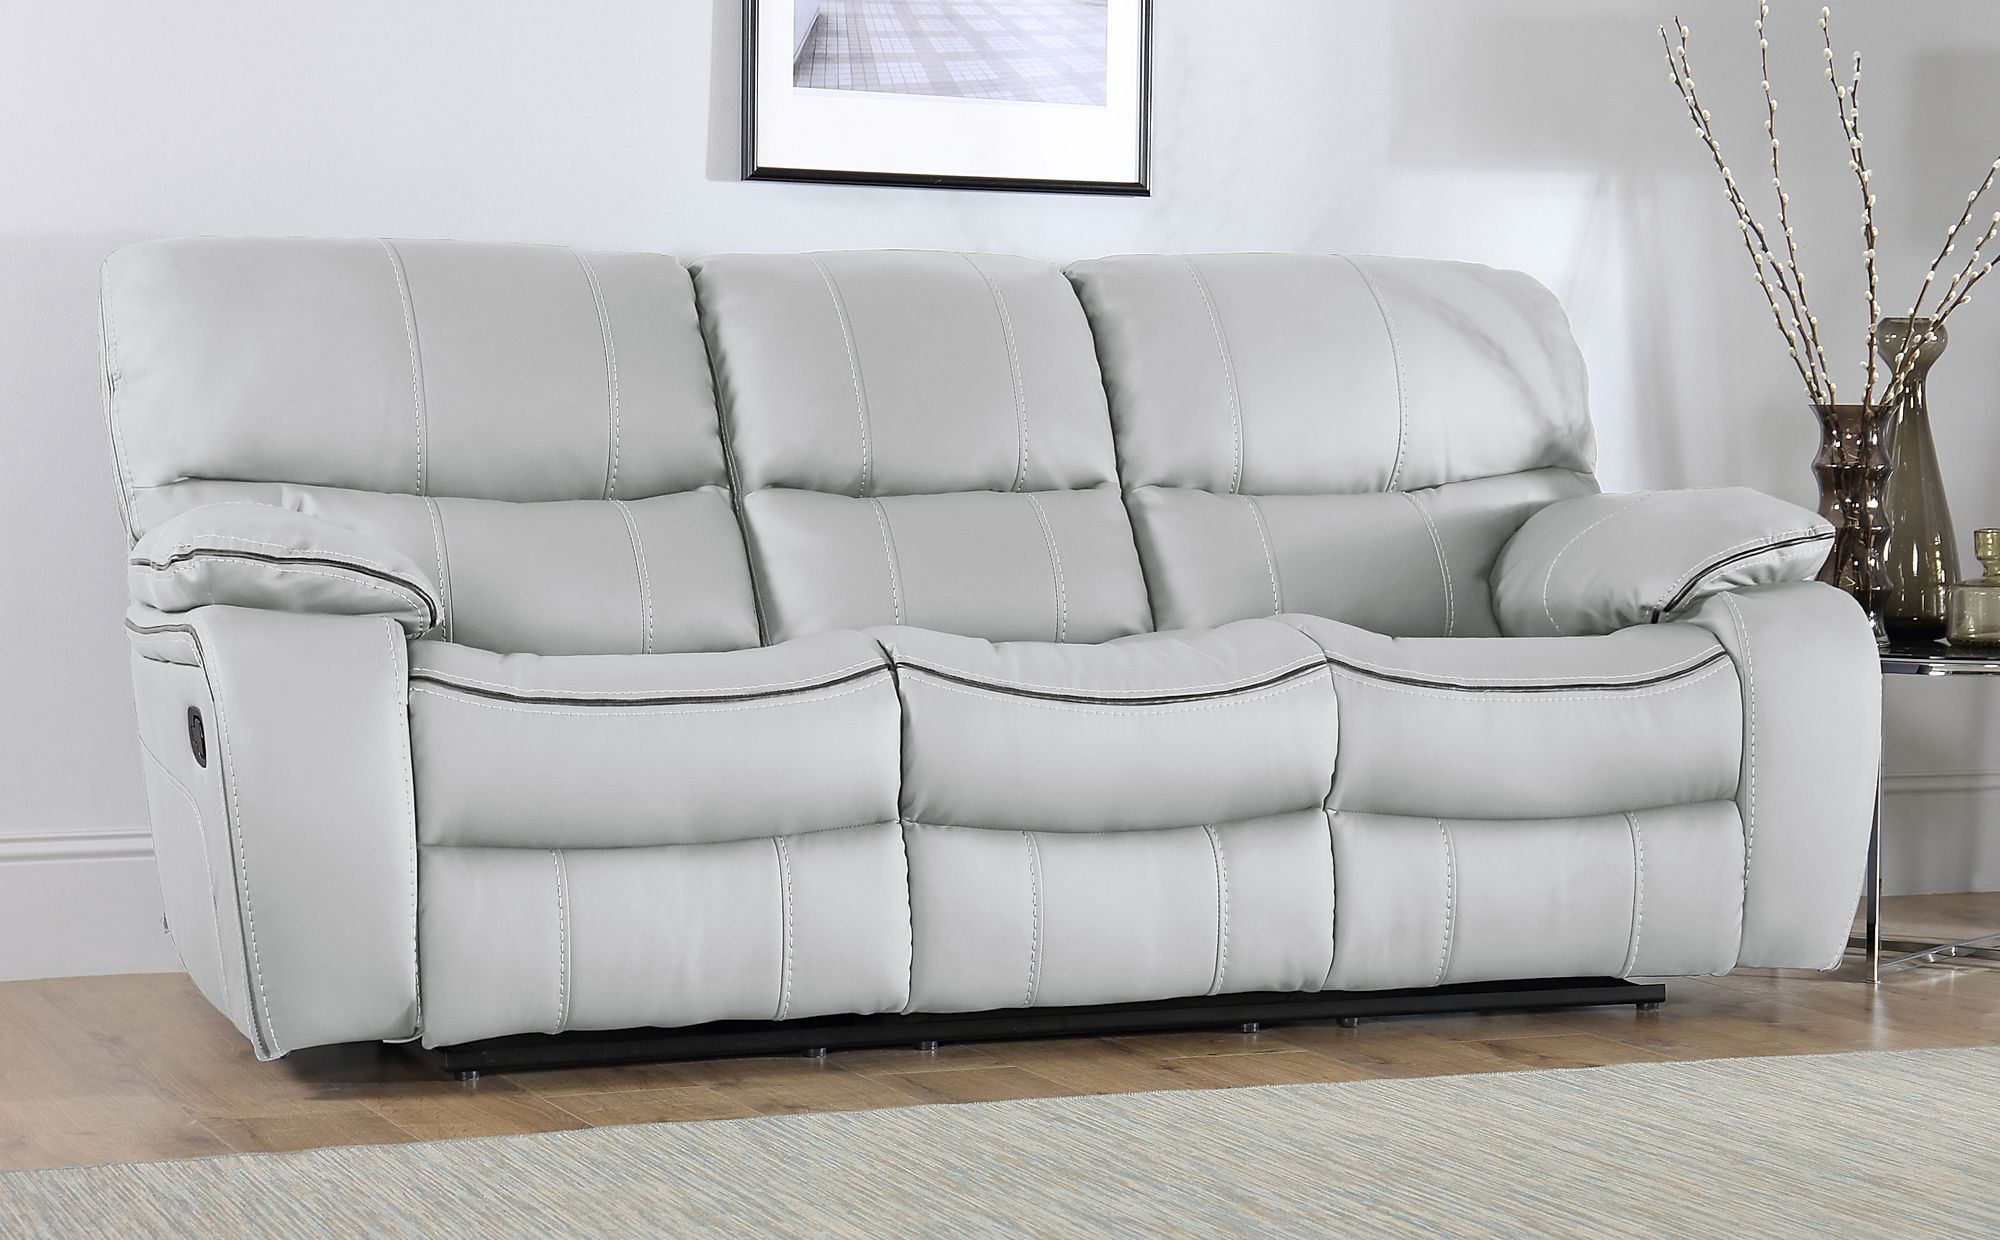 Beaumont Light Grey Leather 3 Seater Recliner Sofa | Furniture Choice Intended For Sofas In Light Gray (Gallery 5 of 22)